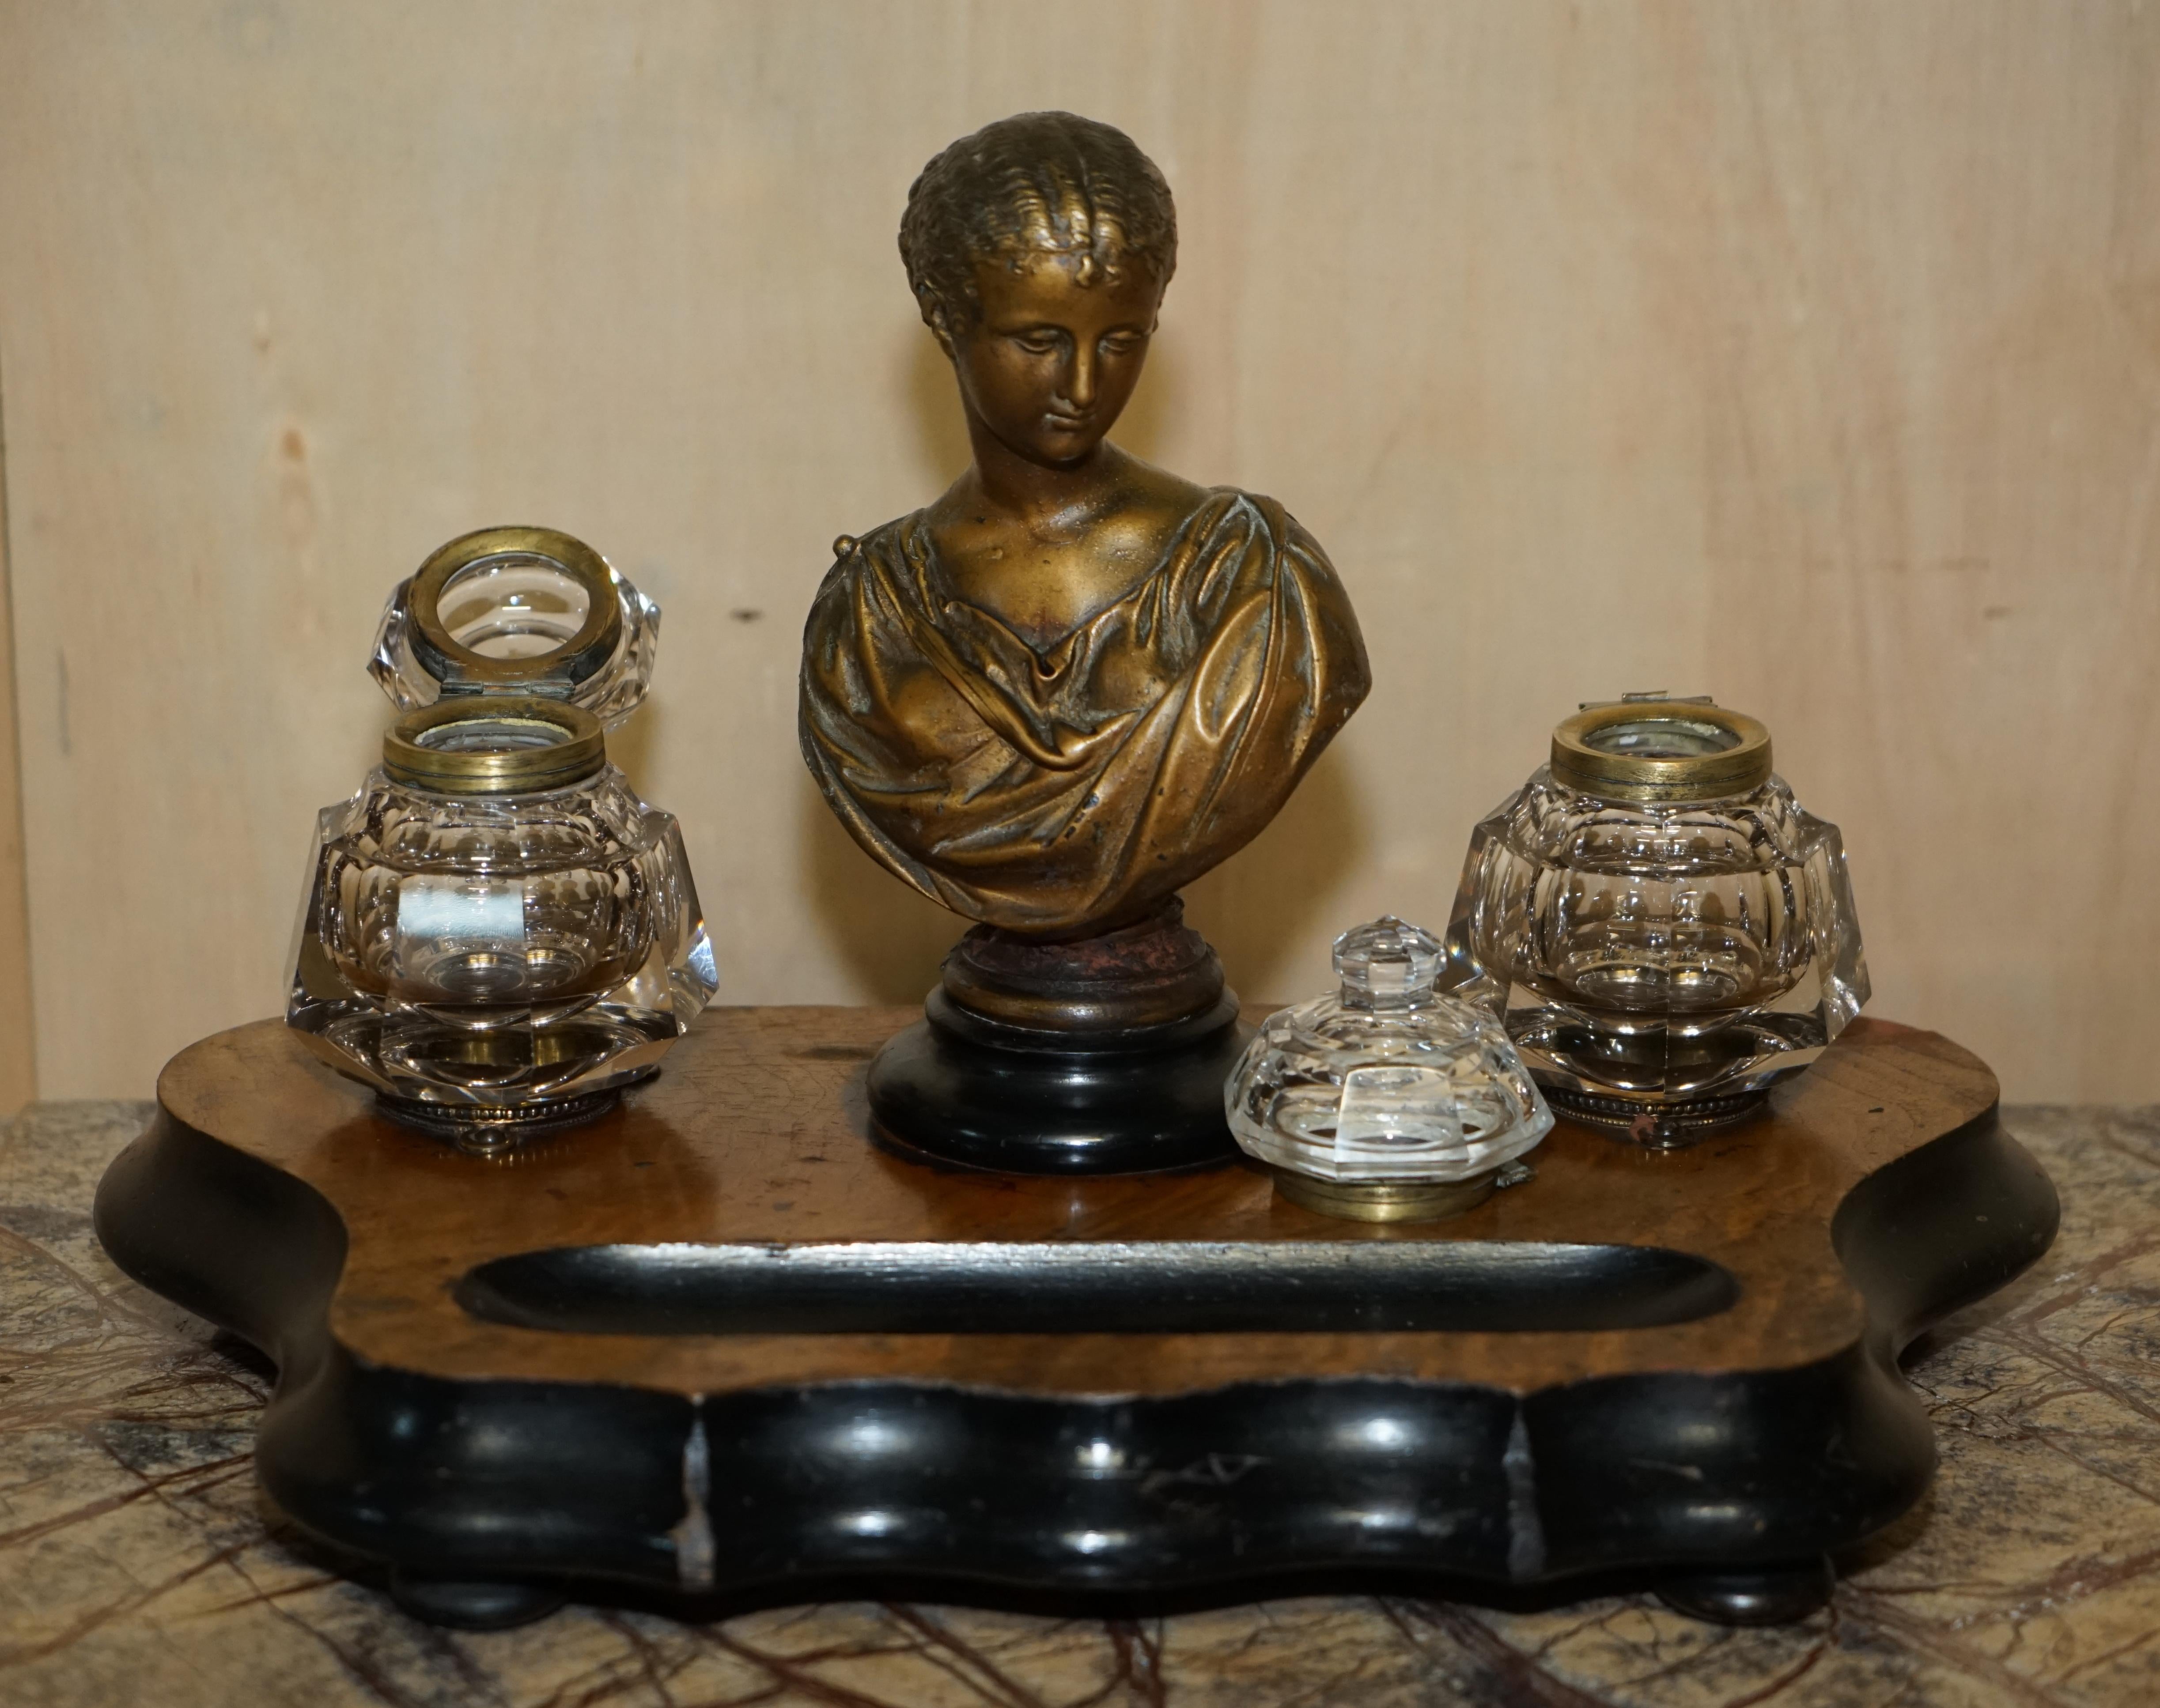 Stunning Antique French Bronze Statue on Inkwell Stand, circa 1880 For Sale 8